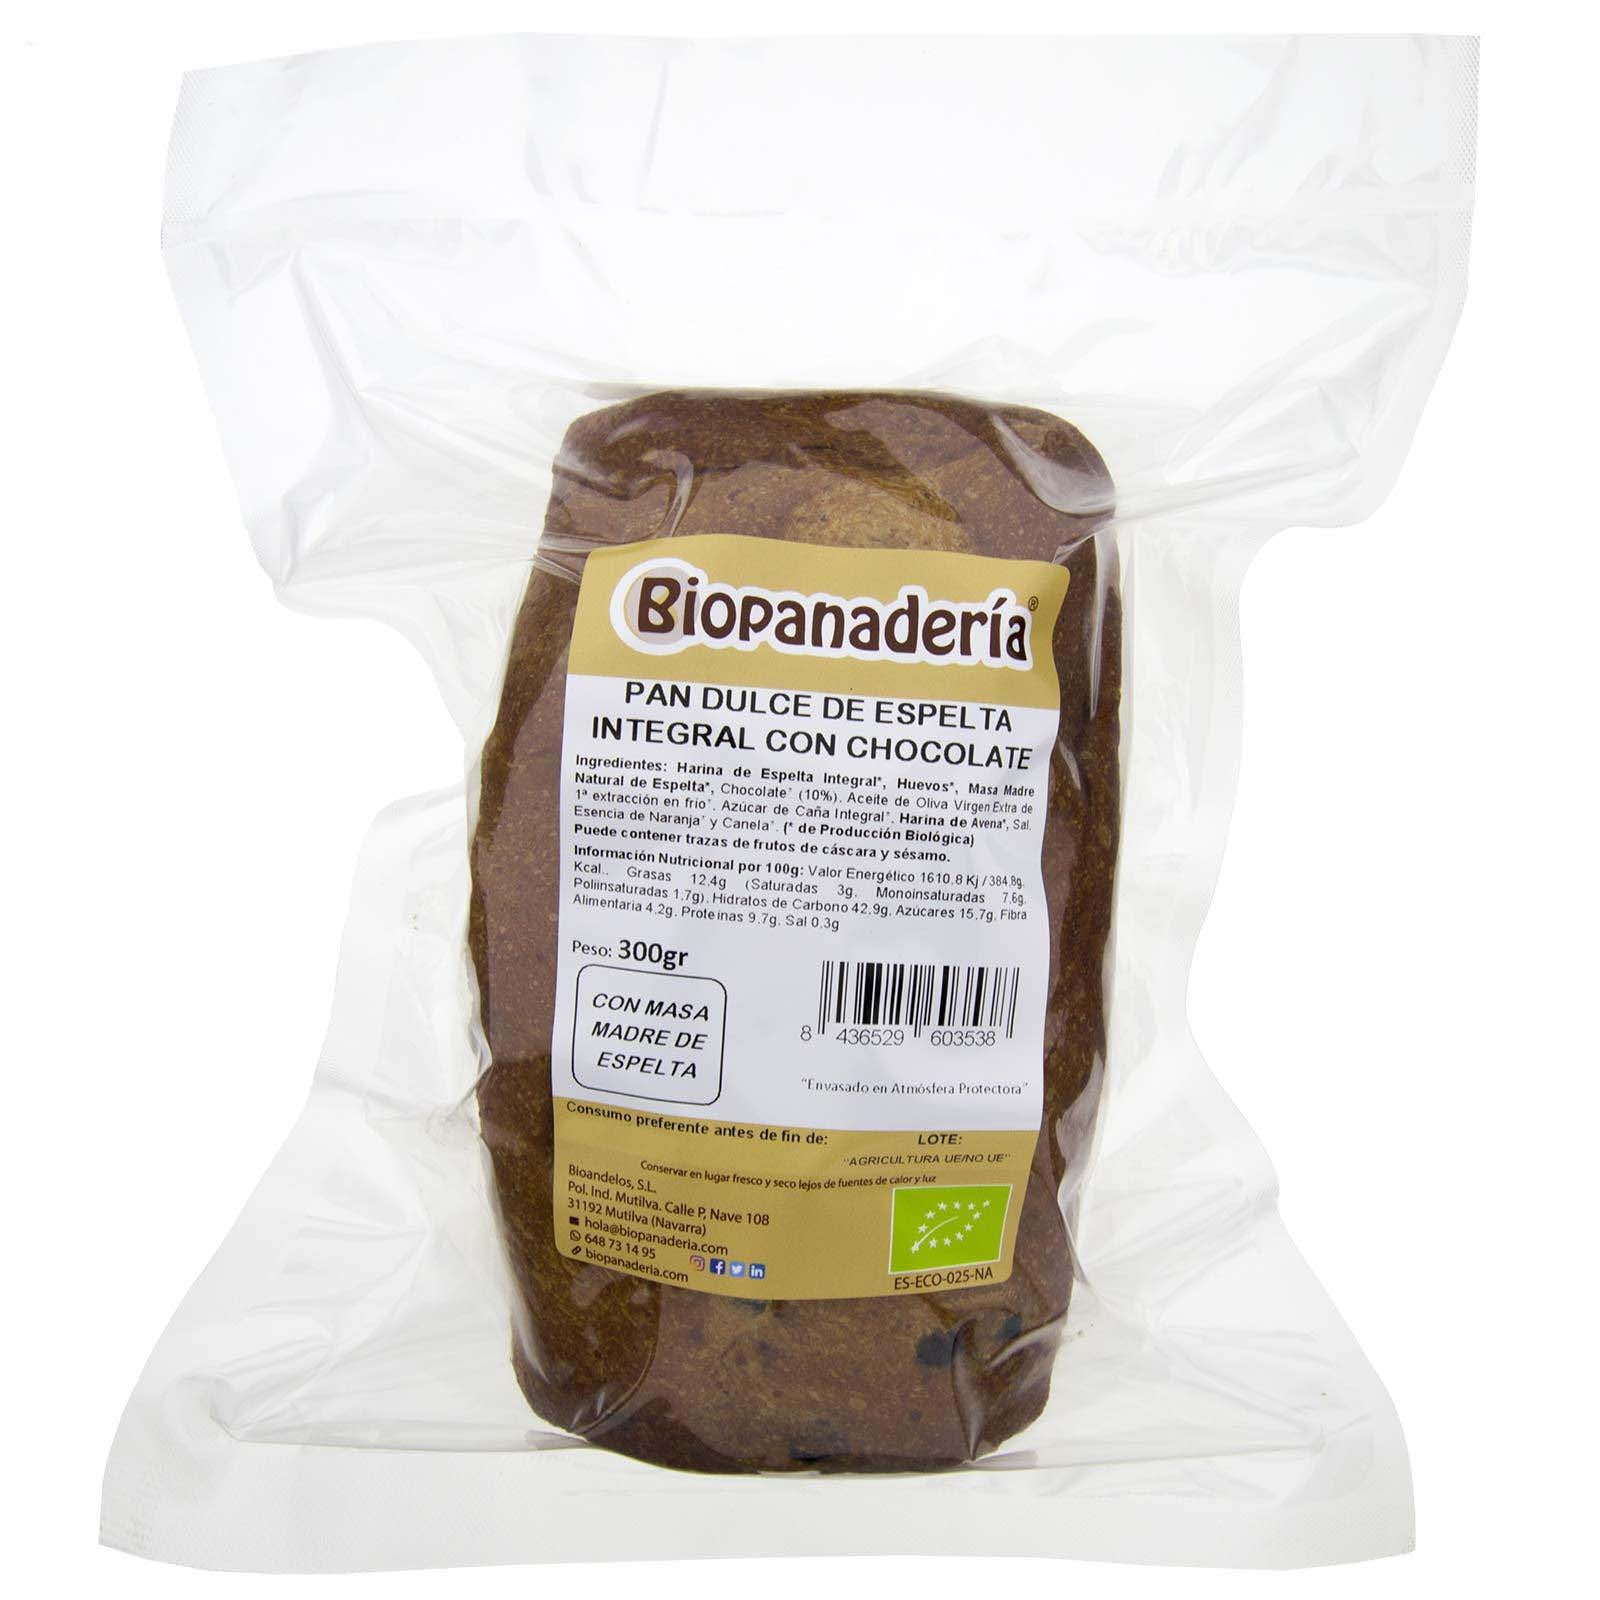 Spell brioche bread with chocolate 300g ecological craftsman